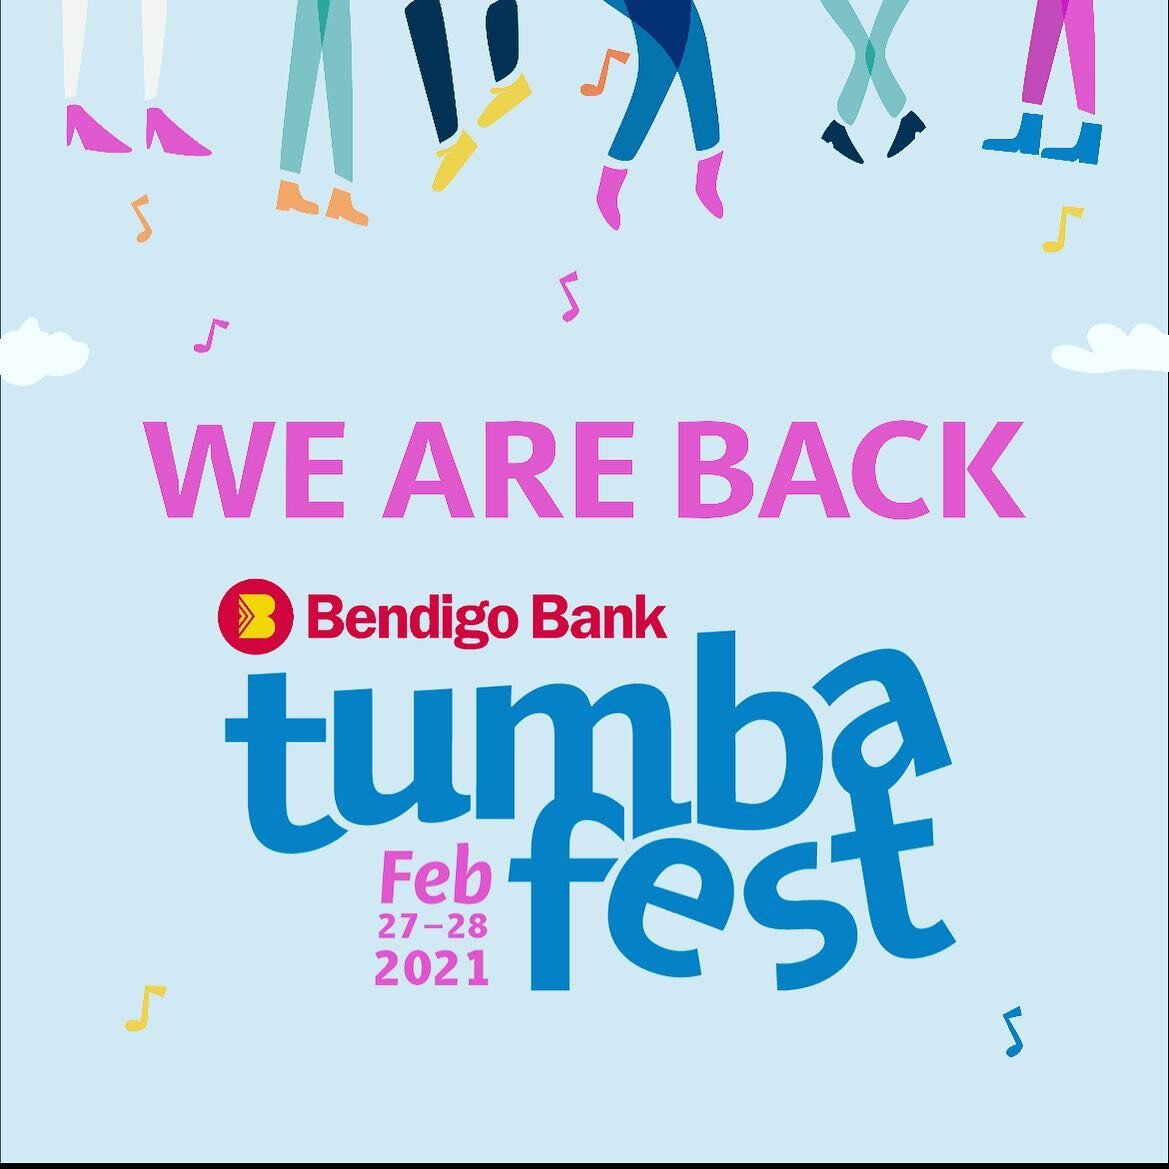 WE'RE BACK....

2021 @bendigocb_tumbarumba Tumbafest is back on! Mark your calendars for 27-28 February.

We will of course be adhering to the latest government advice and updates will be posted to the website soon.

@chocolatestarfishband and @hurri